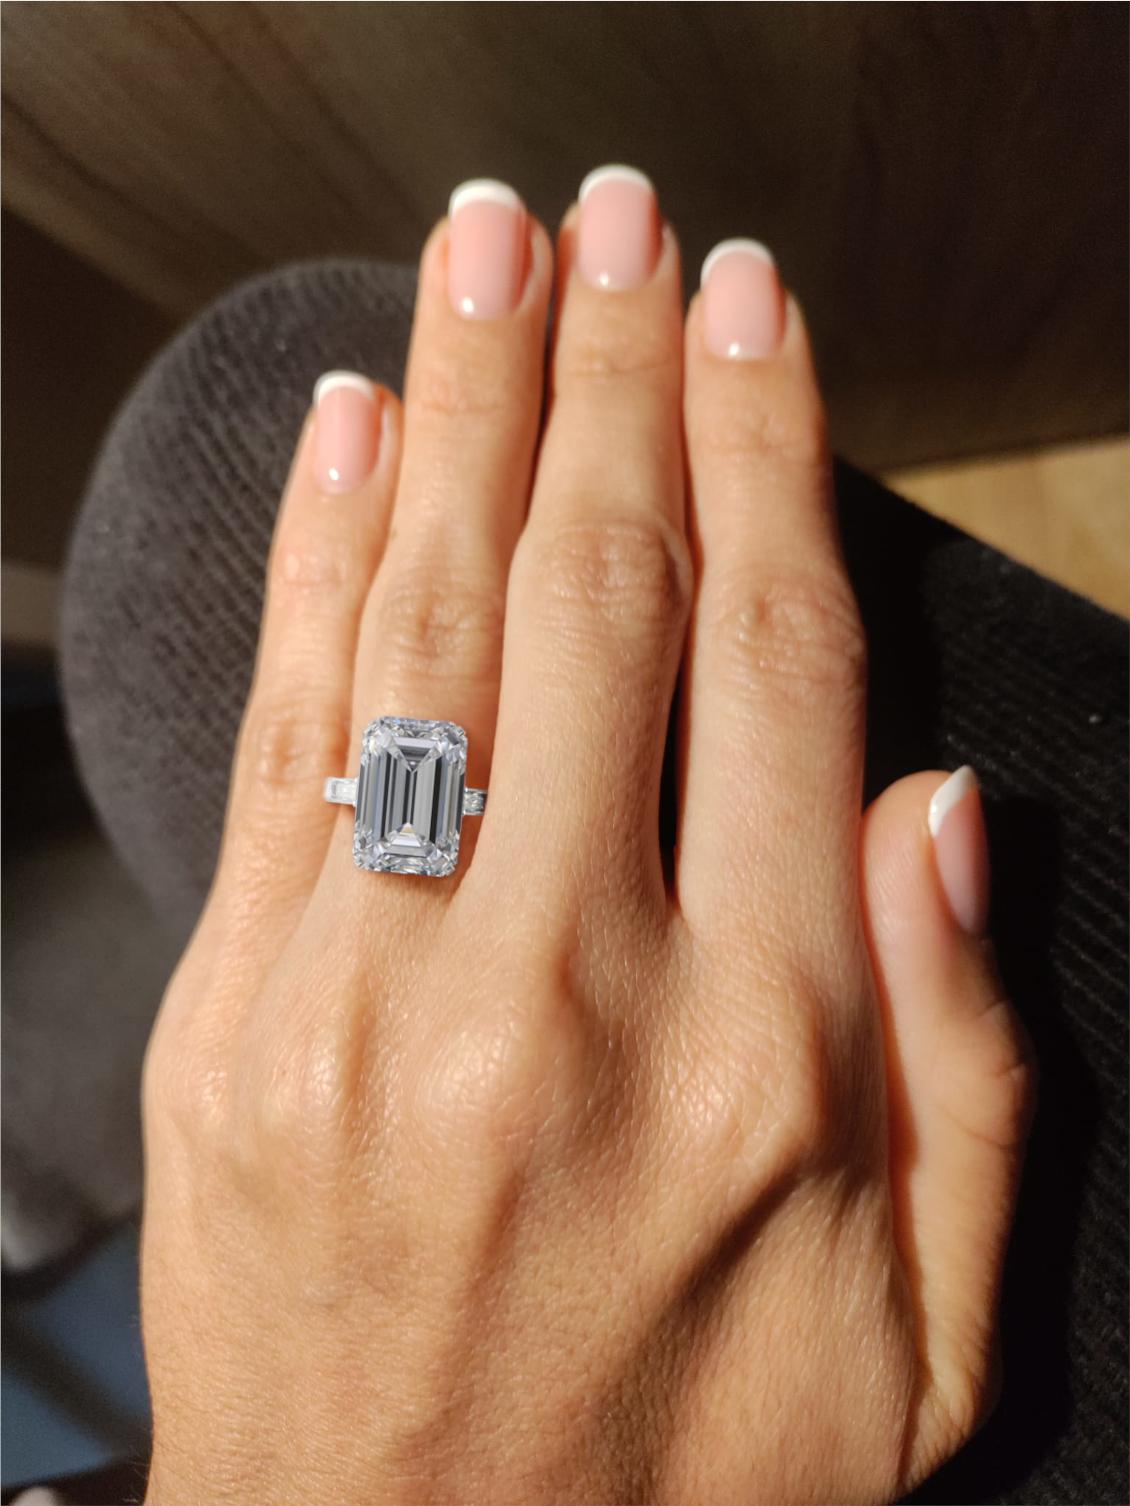 An exquisite 5.30 Emerlald cut diamond ring. The main stone is an incredible 5.30 carat emerald cut diamond flawless clarity d color and excellent polish and excellent symmetry none fluorescence 
type IIA investment grade diamond

This diamond has a